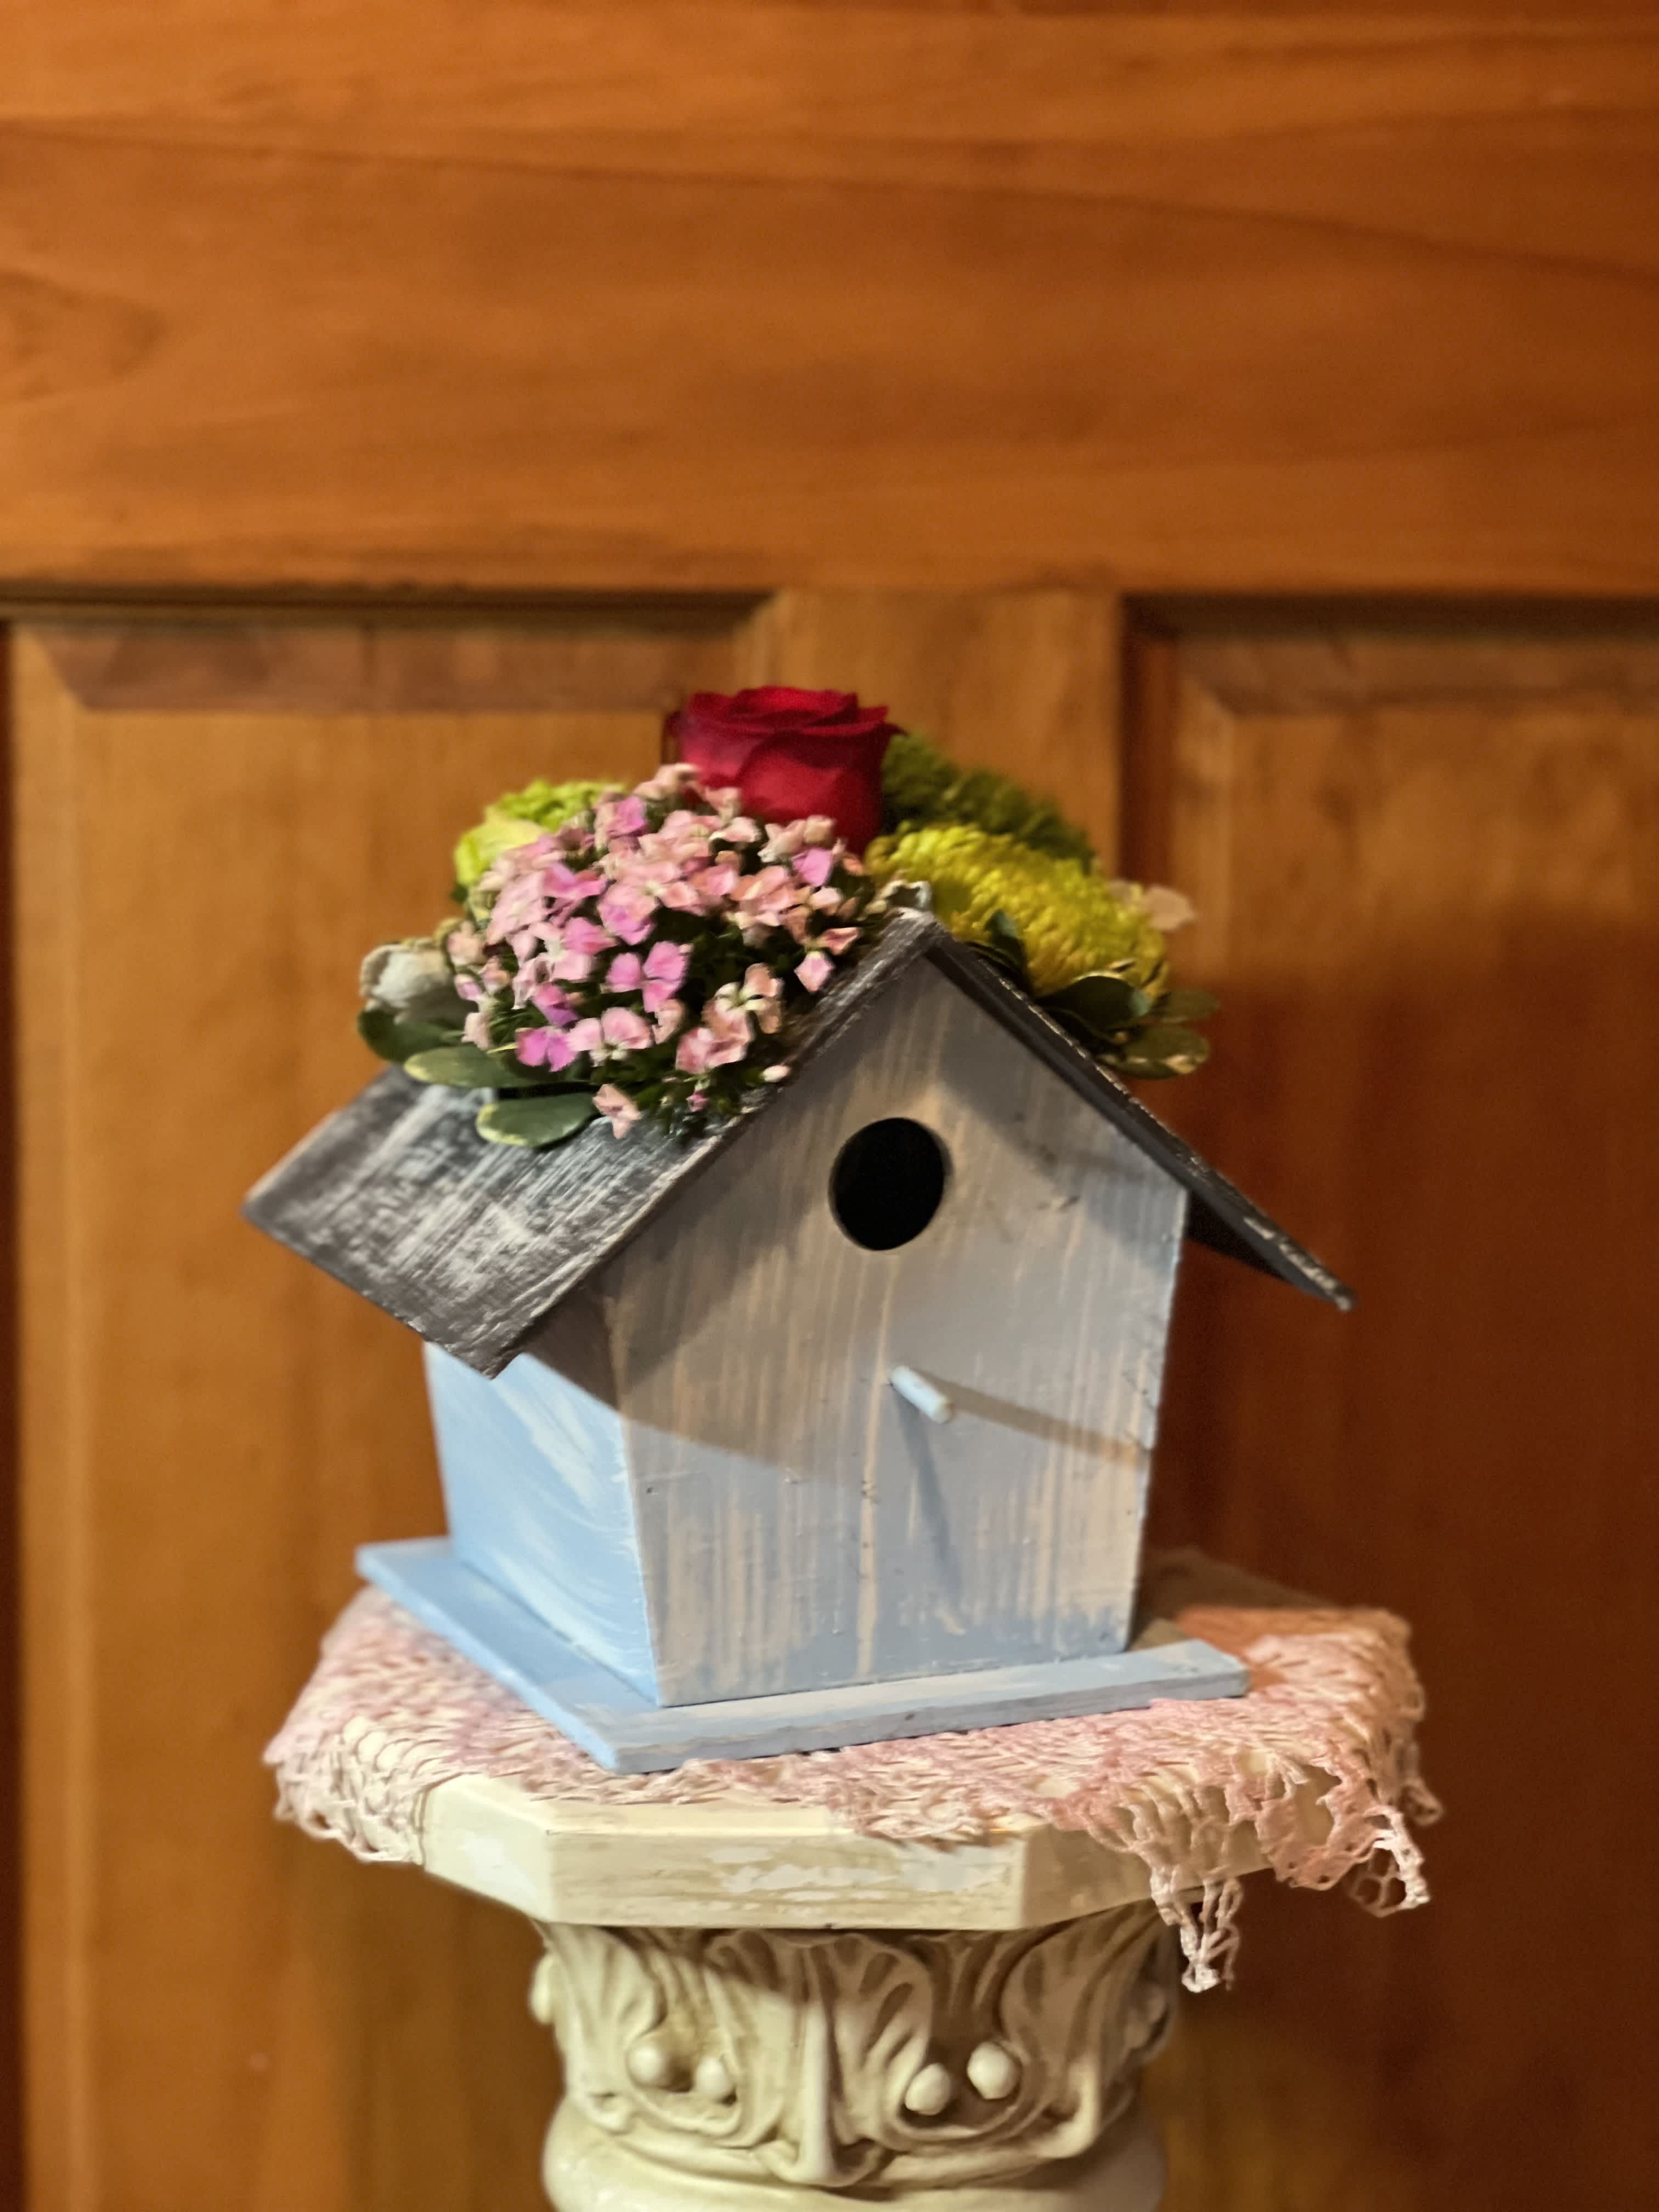 Birdhouse Blues - For all our feathers friends. A cute birdhouse design. Sky blue, whitewashed birdhouse with the freshest flowers of the season. May contain: Roses, Fiji mum, Hydrangea, greenery and other assorted blooms. Birdhouse stands over 7&quot; tall and 8&quot; wide at the roofline.